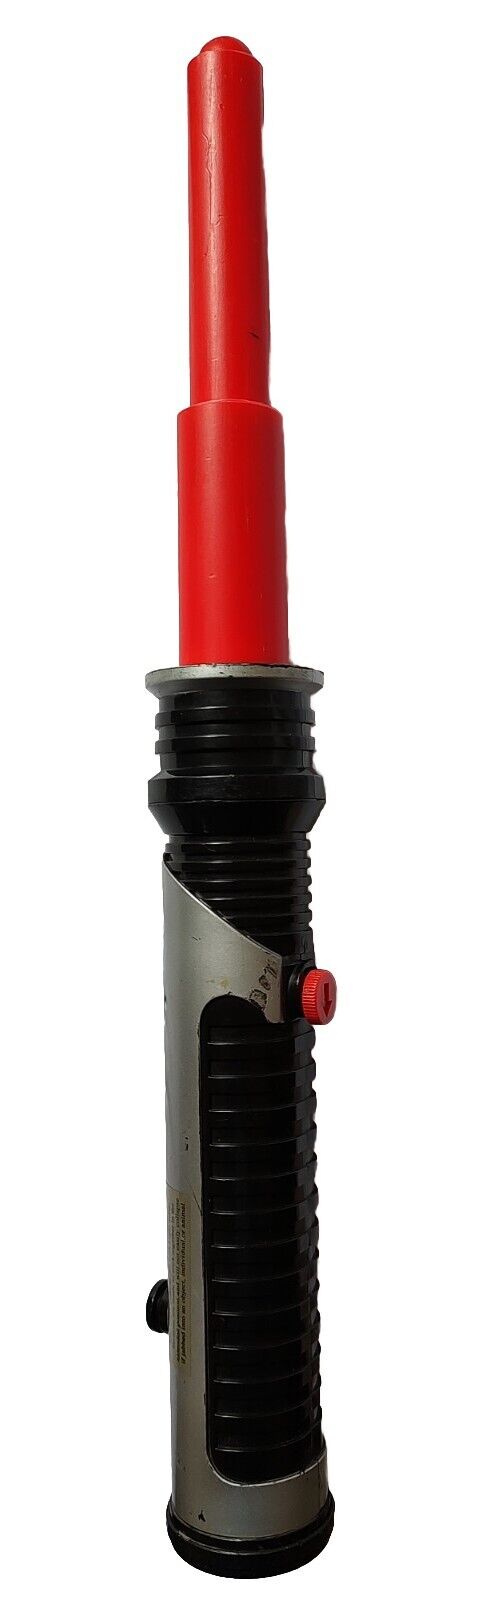 2004 Star Wars Hasbro Red Light Saber, Retractable Pop Out  Non-Electronic